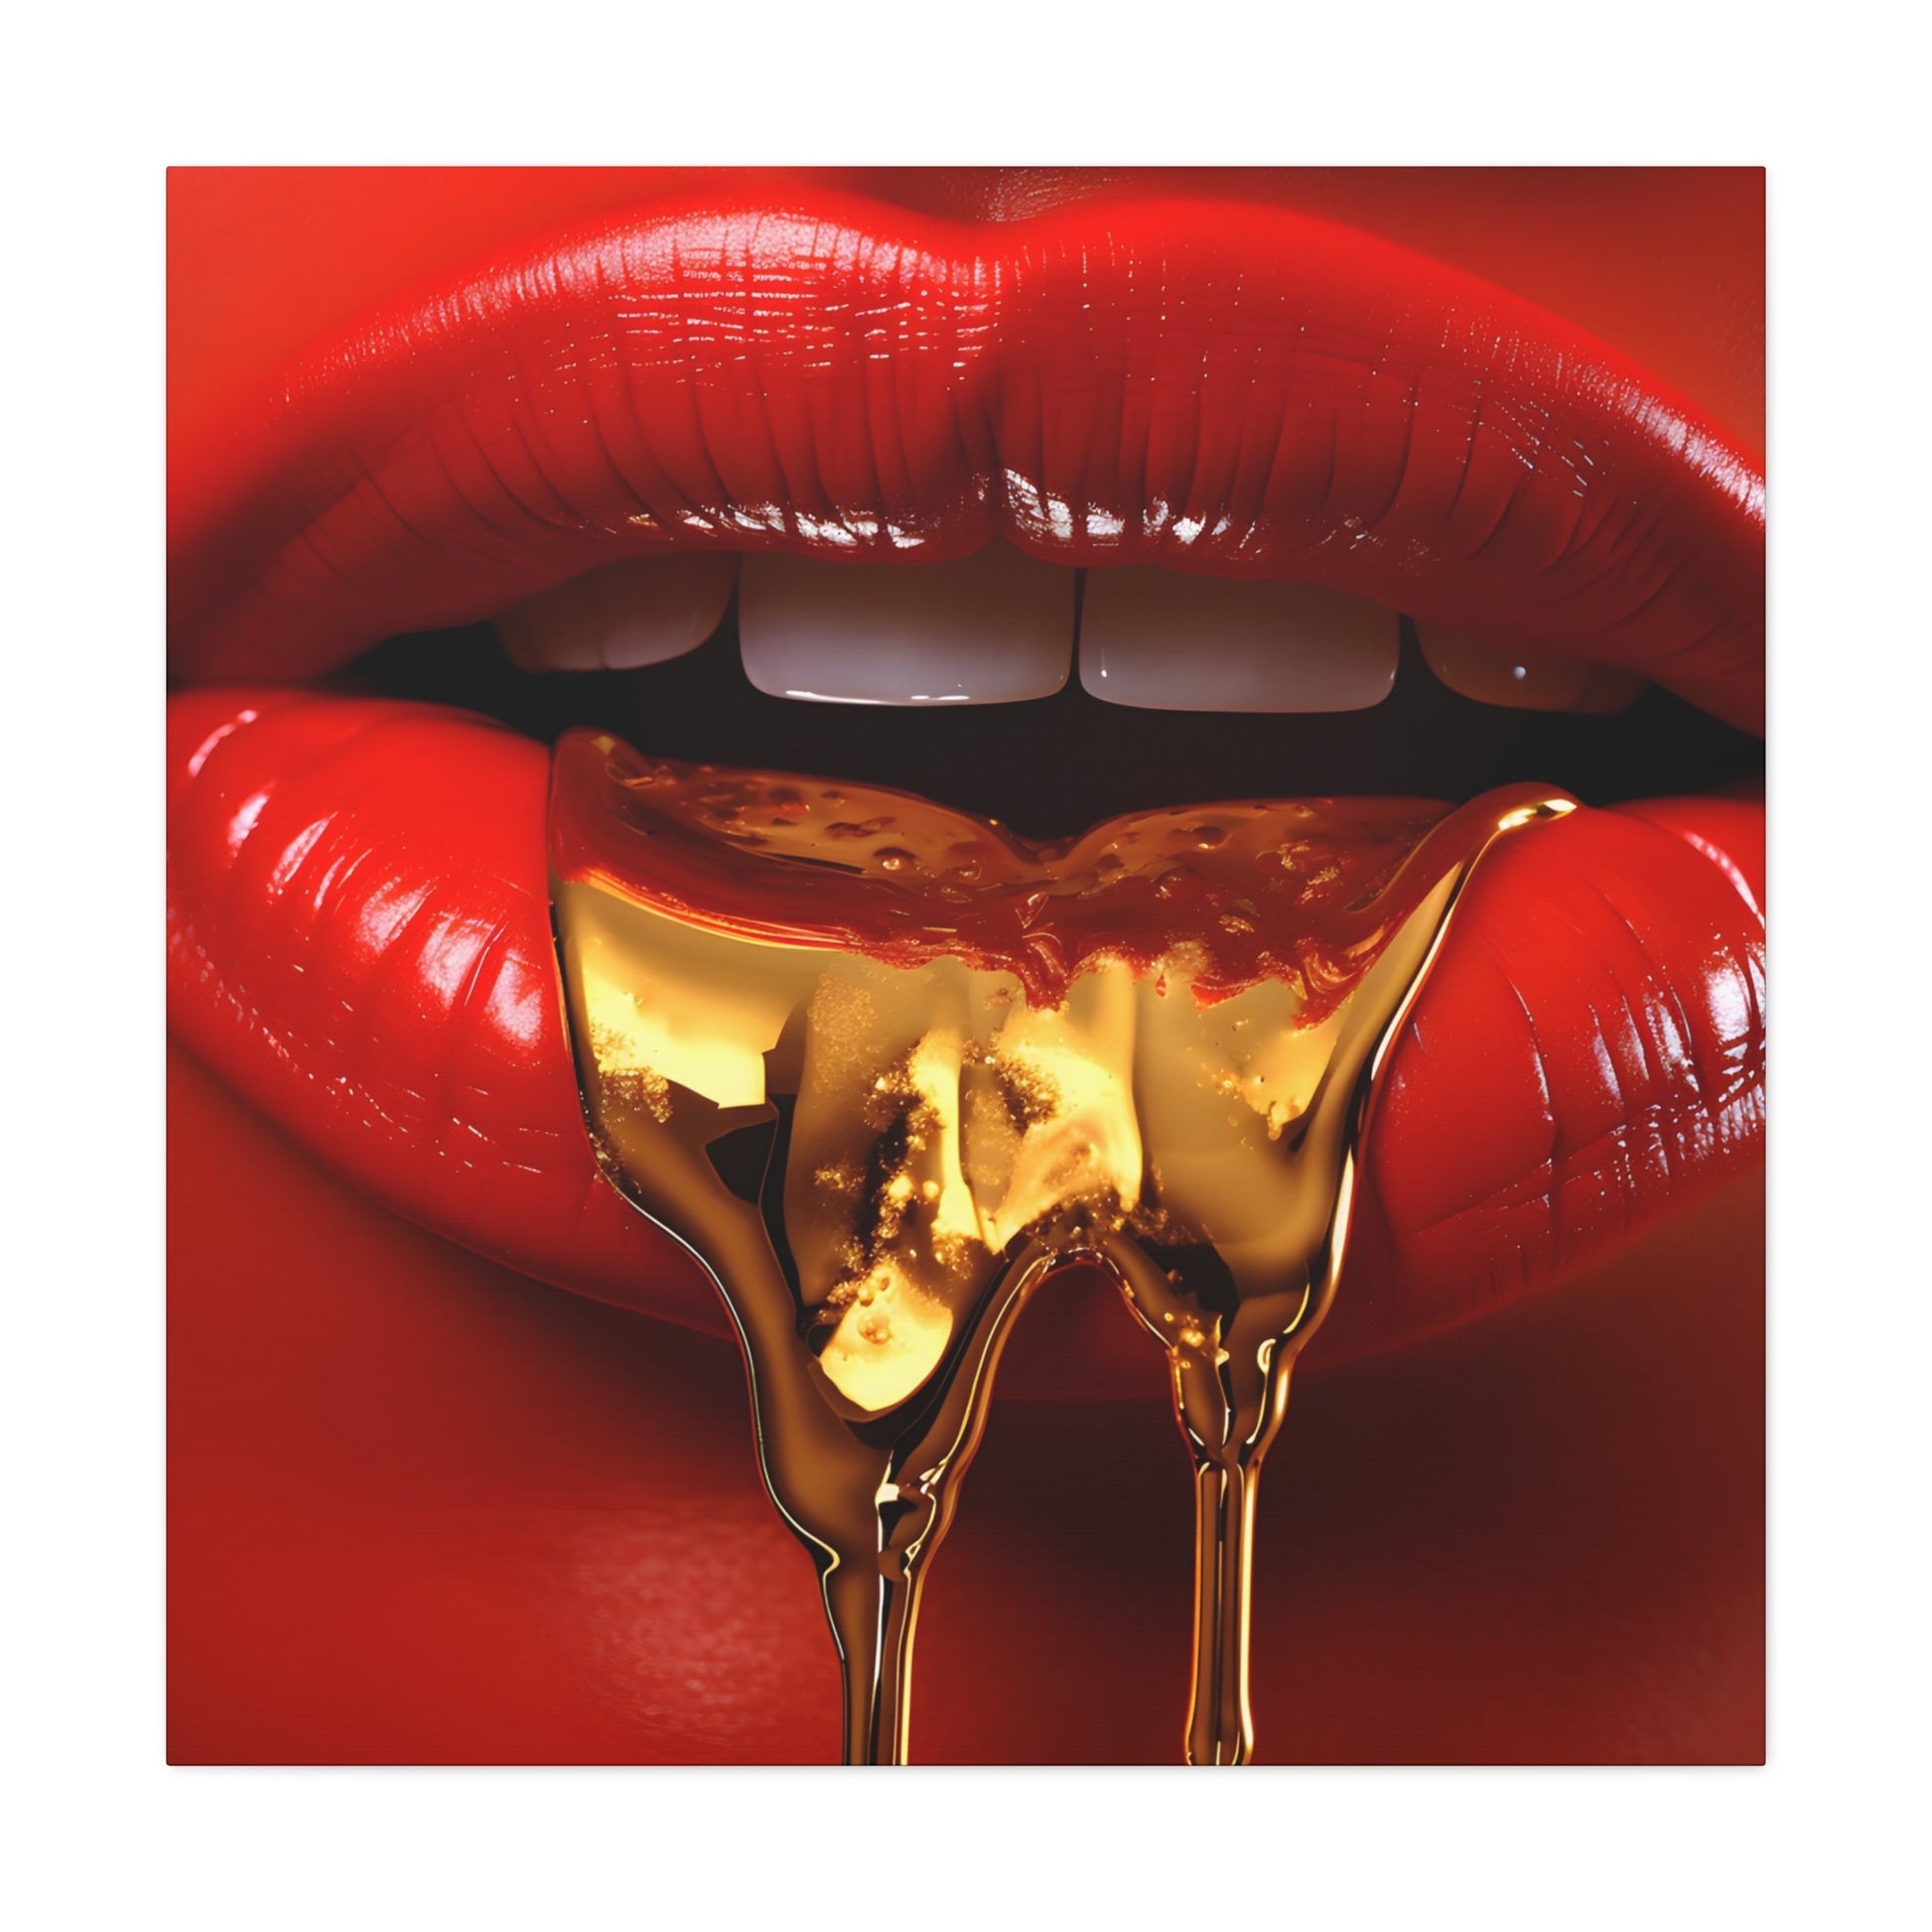 image 6 Golden Seduction by Cassian Marlowe, wall art depicting glossy red lips and molten gold, symbolizing allure and ambition in the theme of opulence